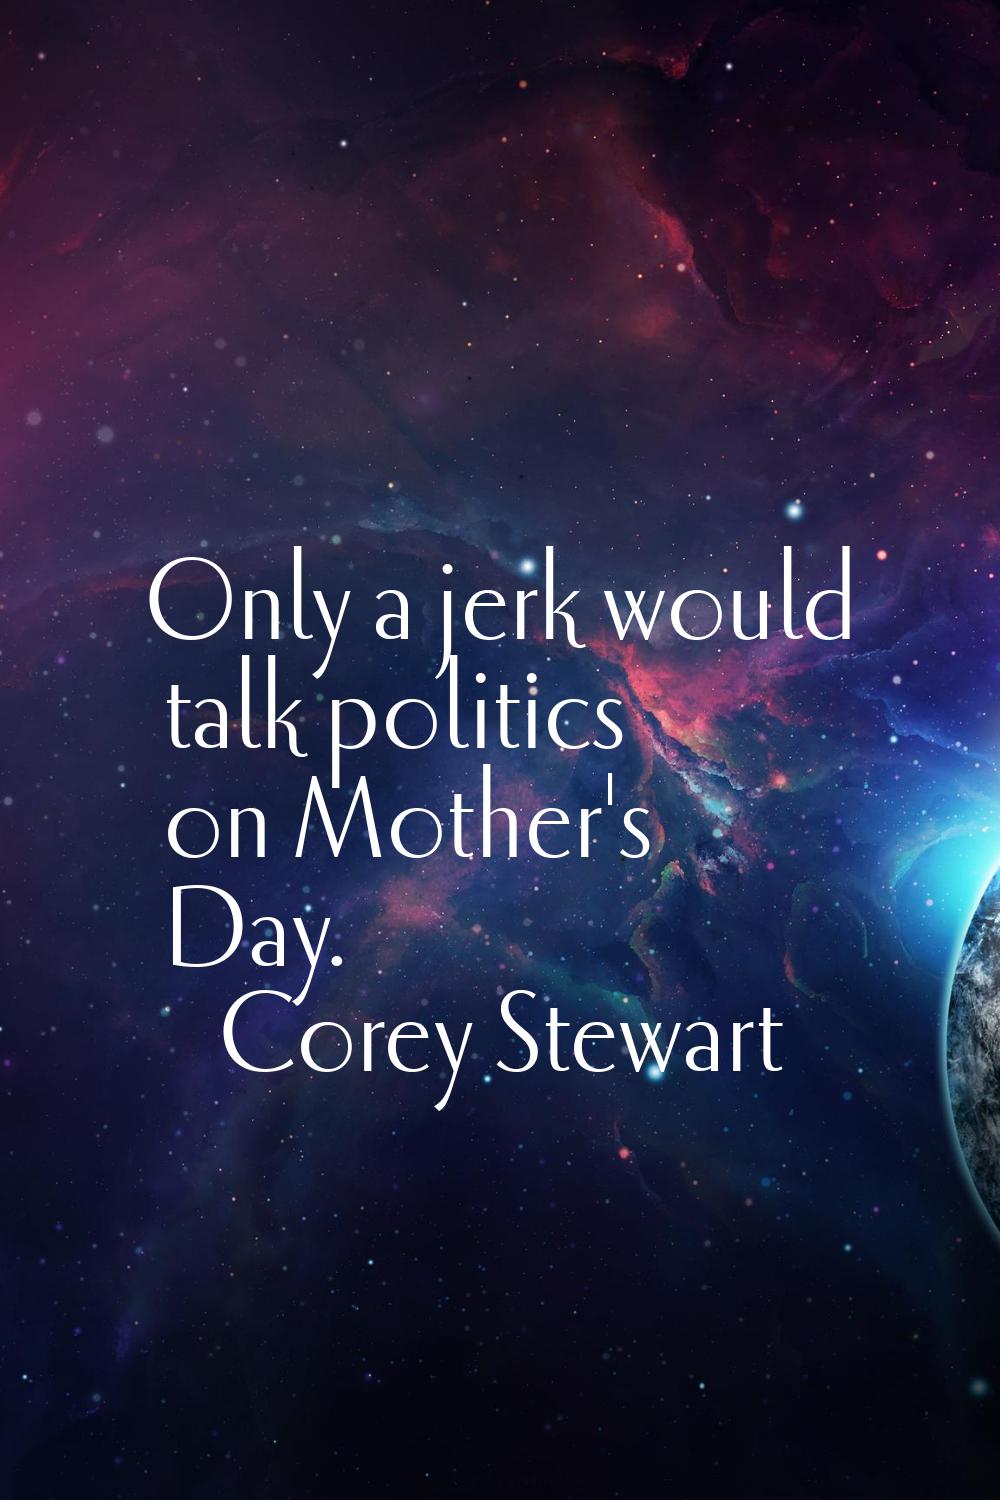 Only a jerk would talk politics on Mother's Day.